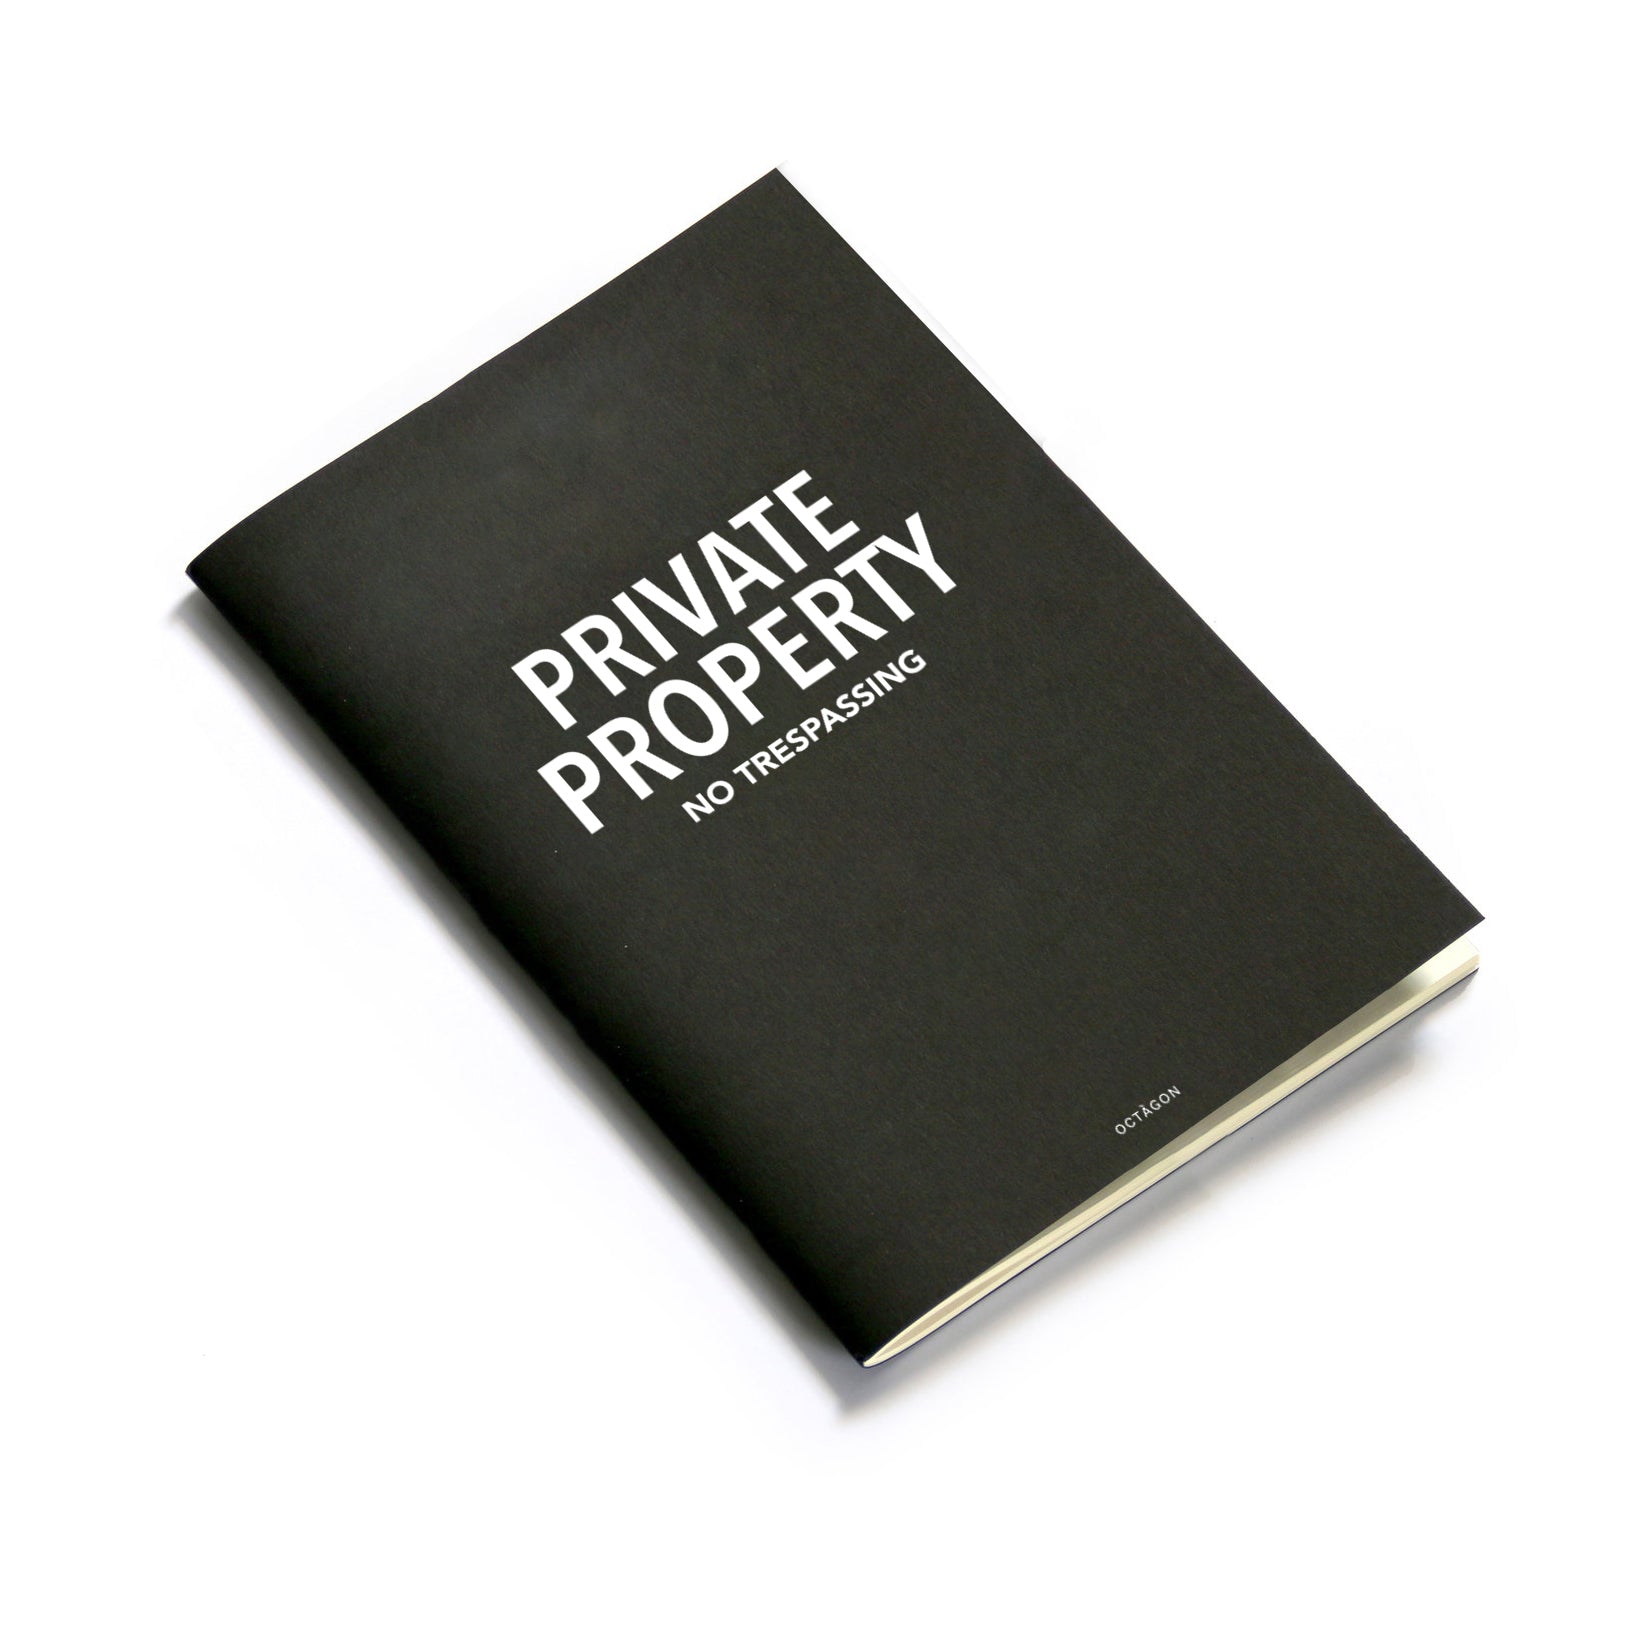 "Private property" thin notebook. Cover black color and white typography.